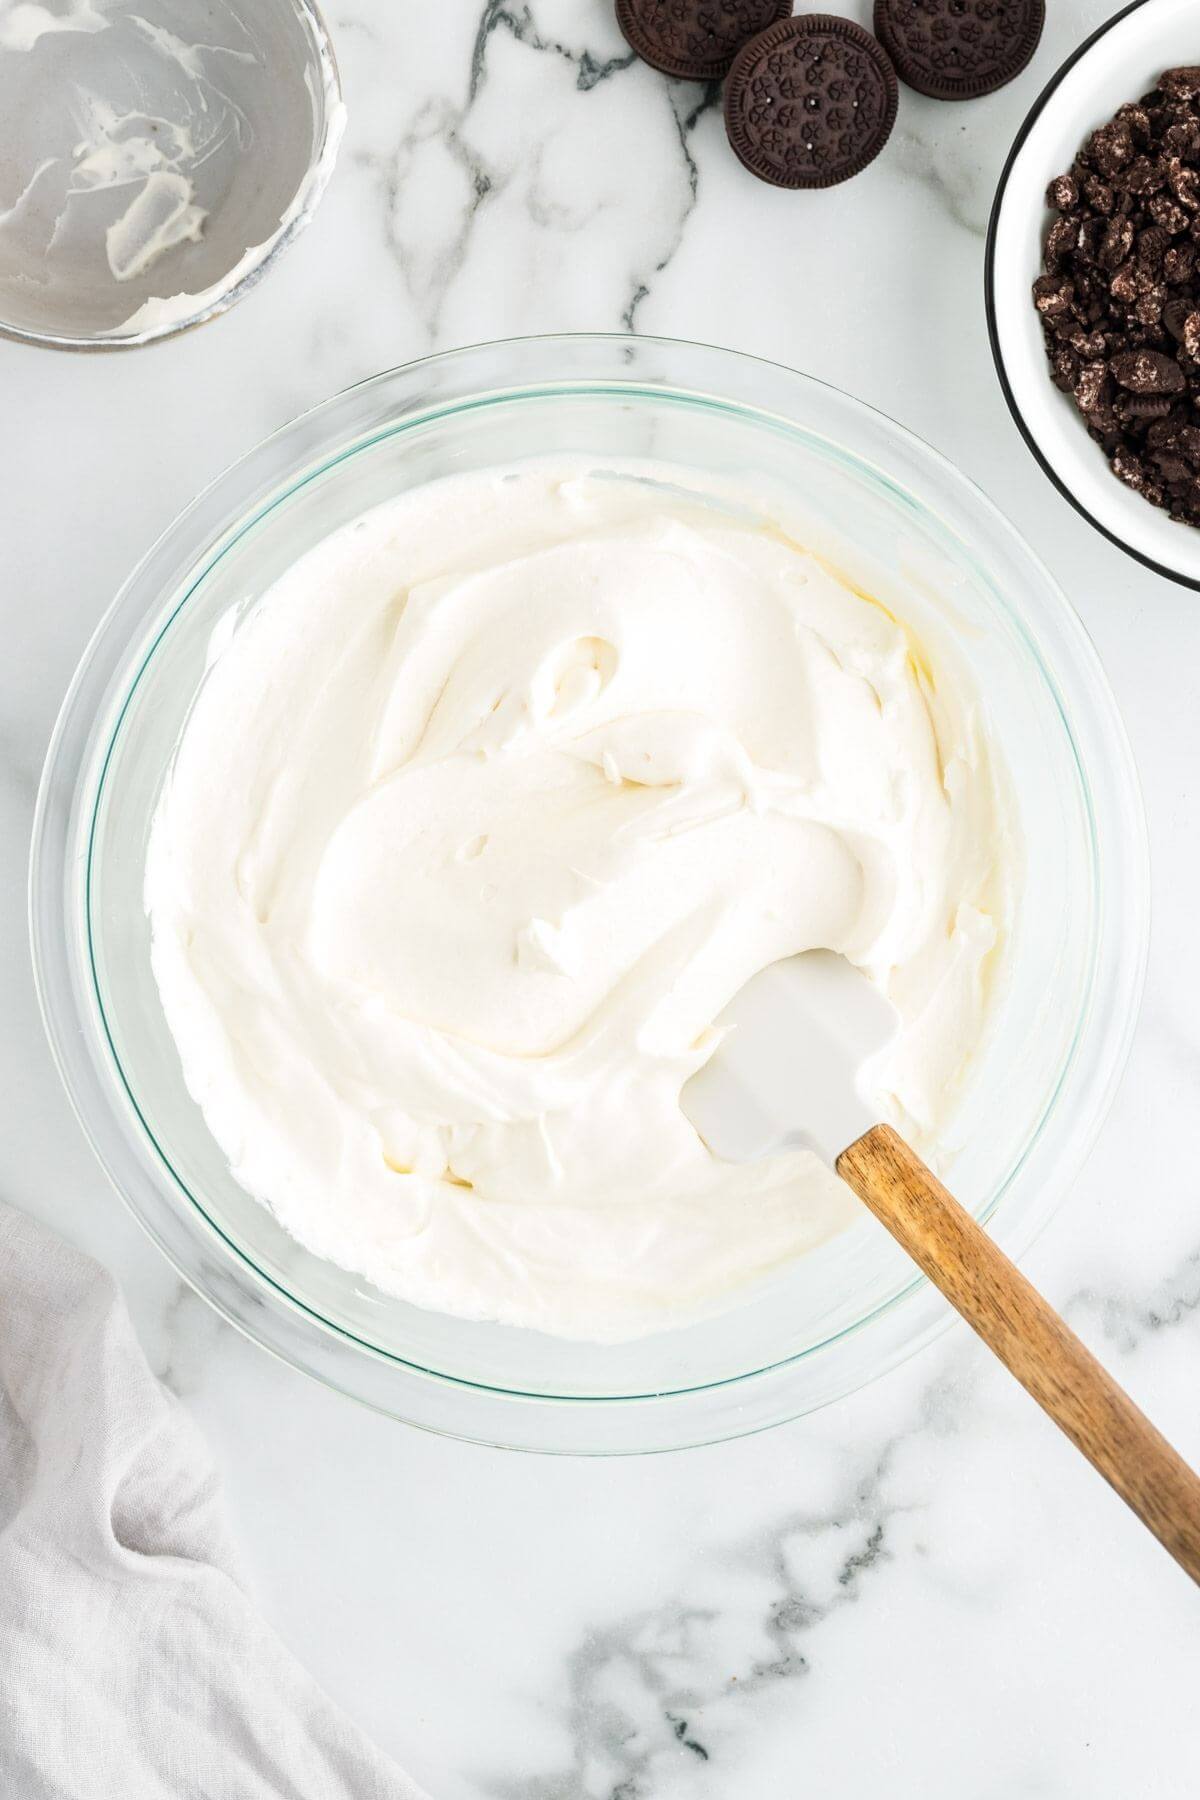 Whipped heavy cream in a large bowl with spatula.